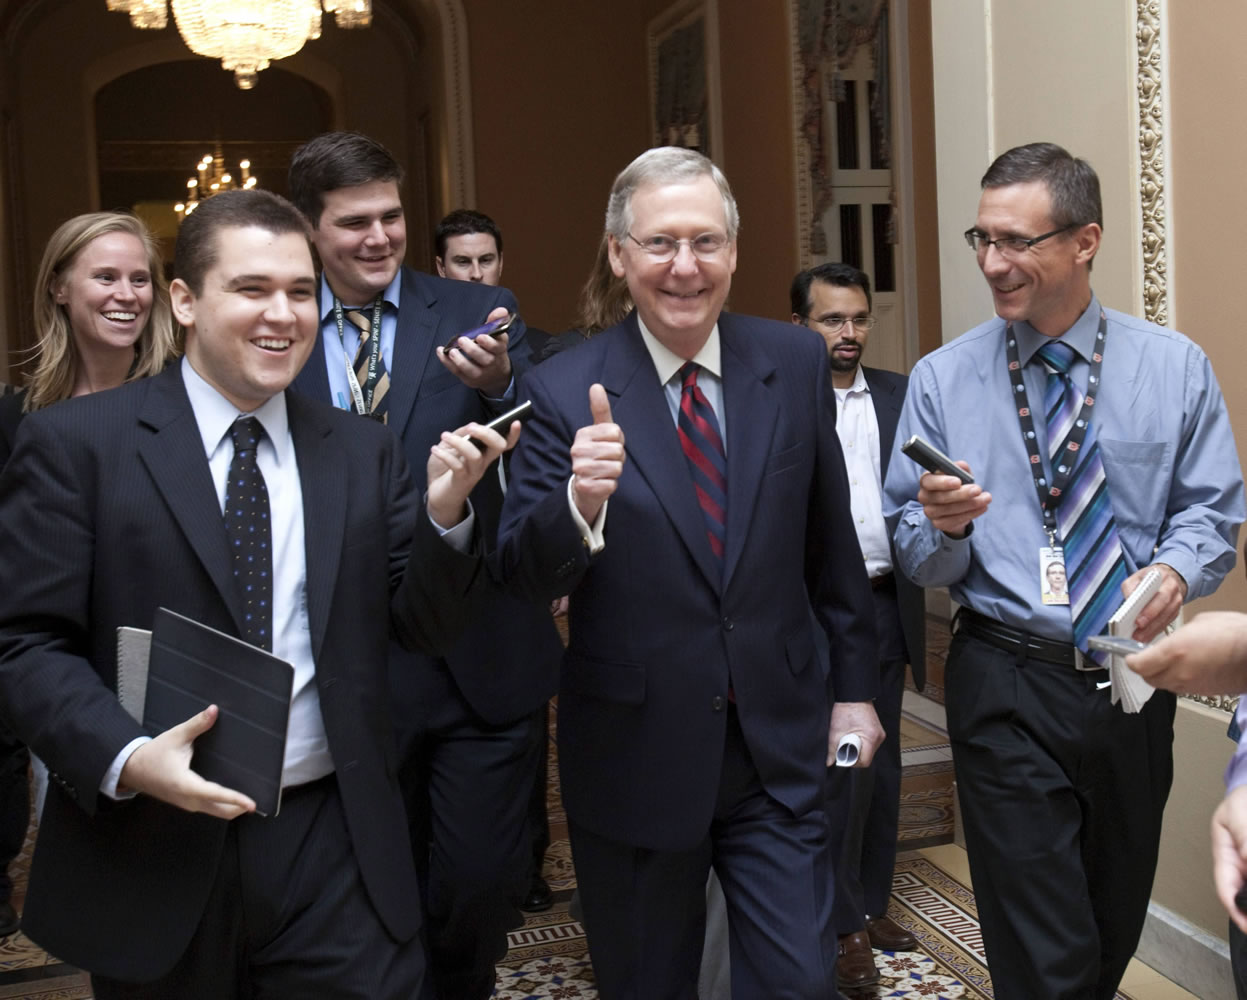 Senate Minority Leader Mitch McConnell, R-Ky., is all smiles Sunday as he walks to the Senate floor to announce that a deal has been reached on the debt ceiling on Capitol Hill in Washington.